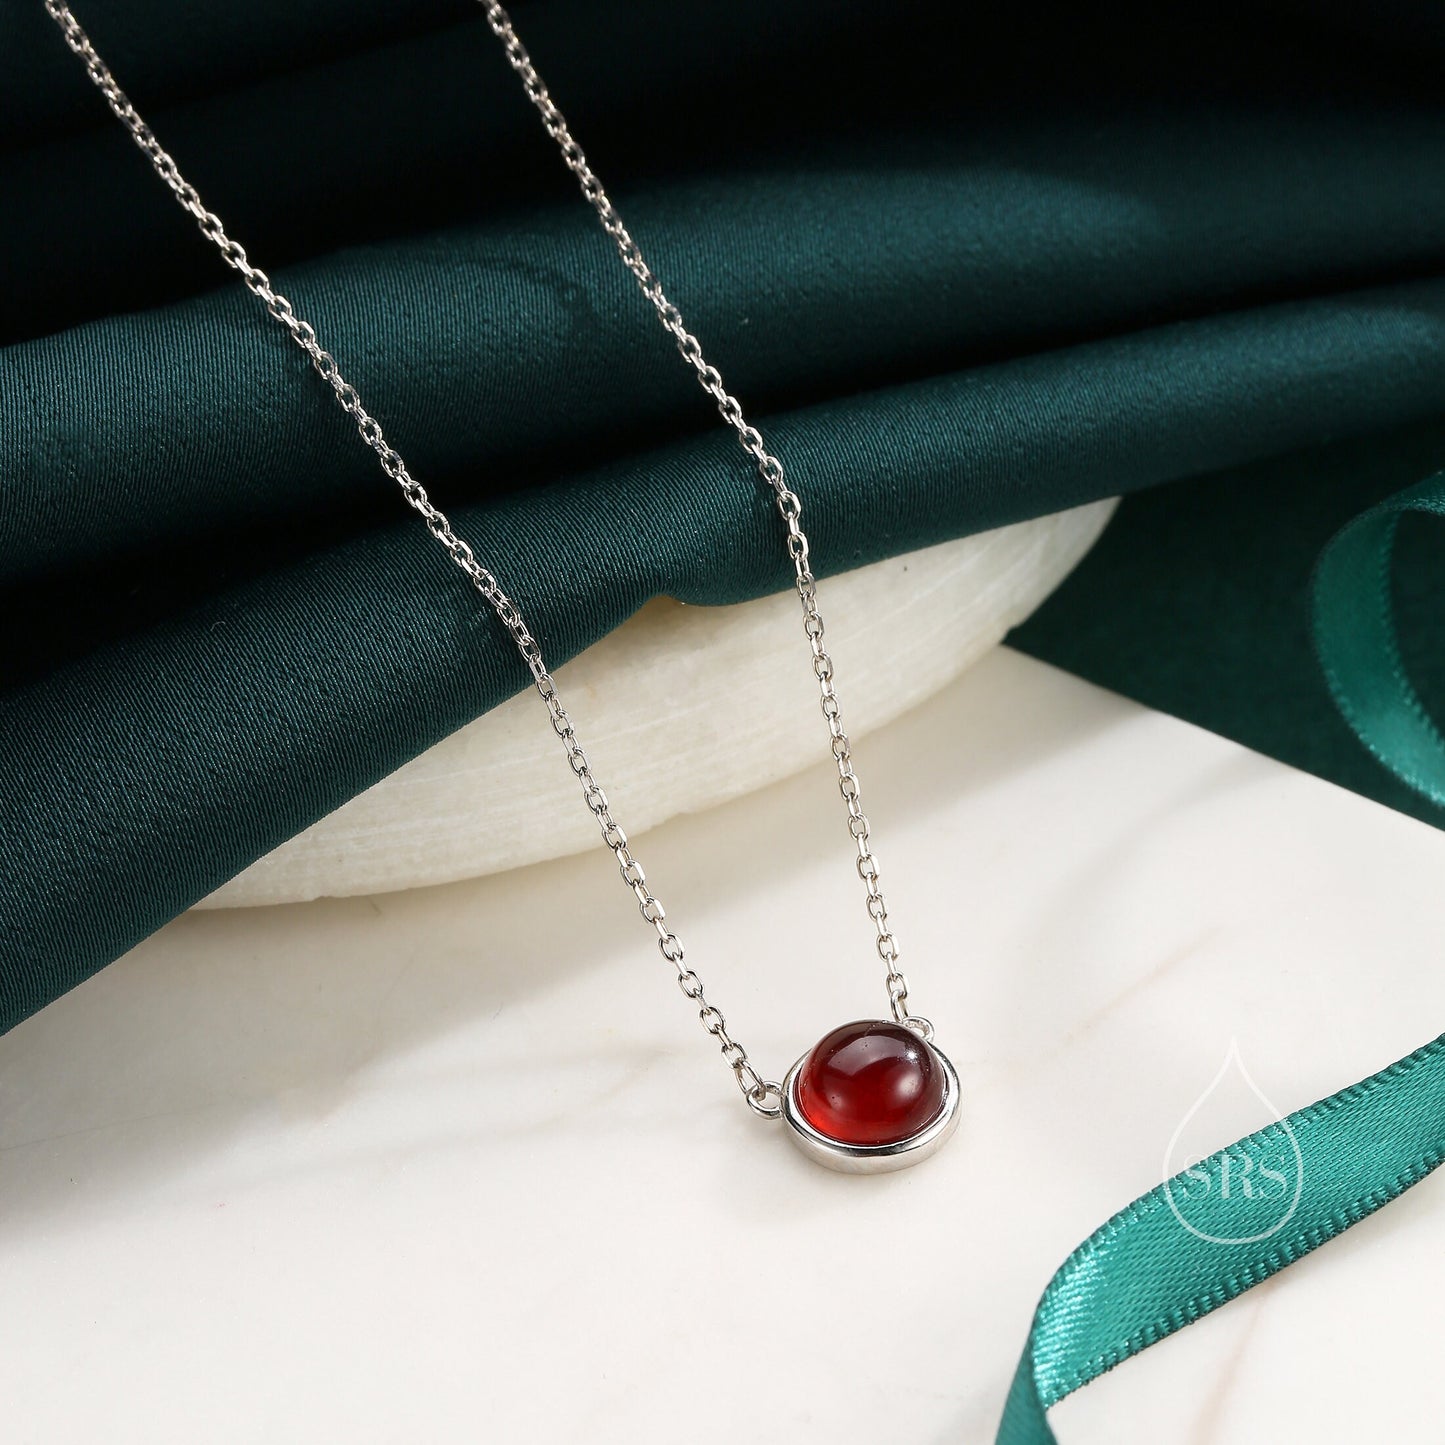 Sterling Silver Genuine Garnet Dainty Coin Pendant Necklace - Delicate Garnet Stone Coin Necklace, January Birthstone